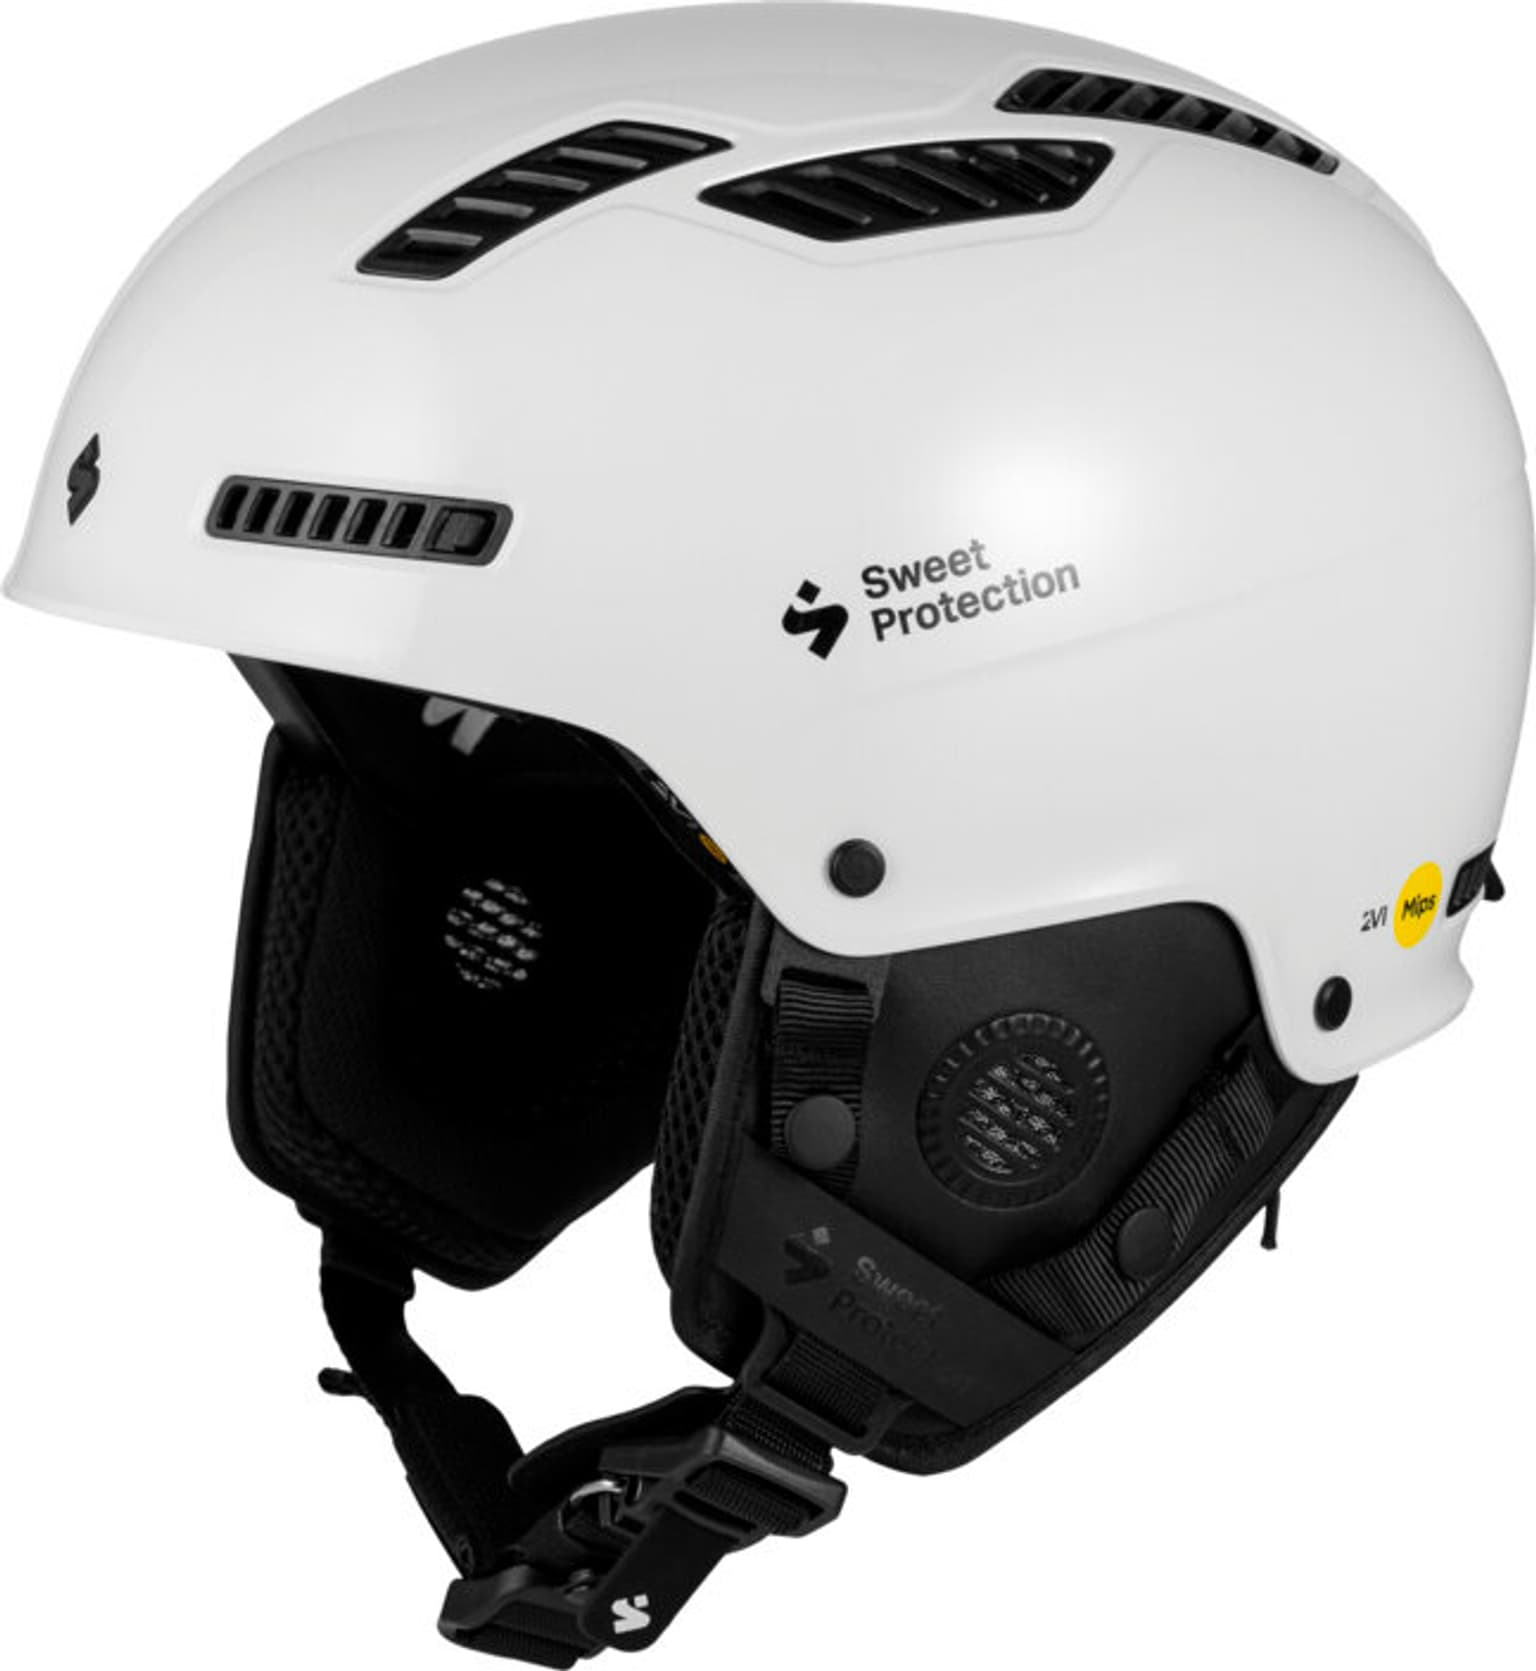 Sweet Protection Sweet Protection Igniter 2Vi MIPS Skihelm weiss 1